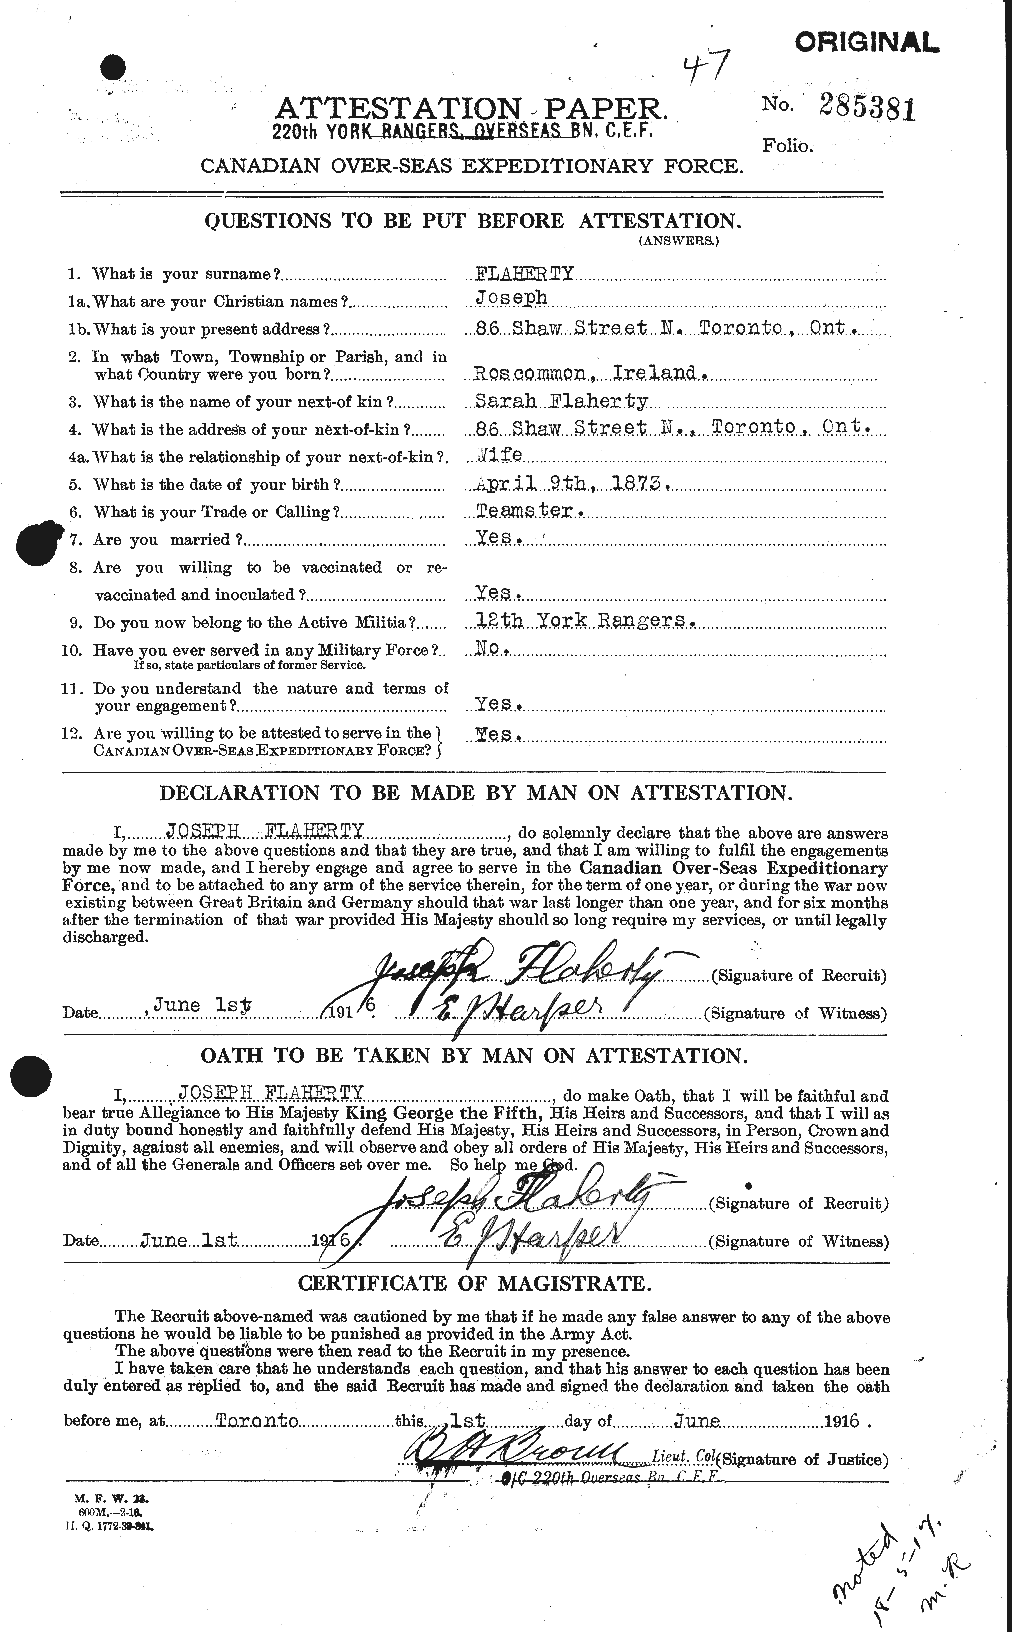 Personnel Records of the First World War - CEF 323367a